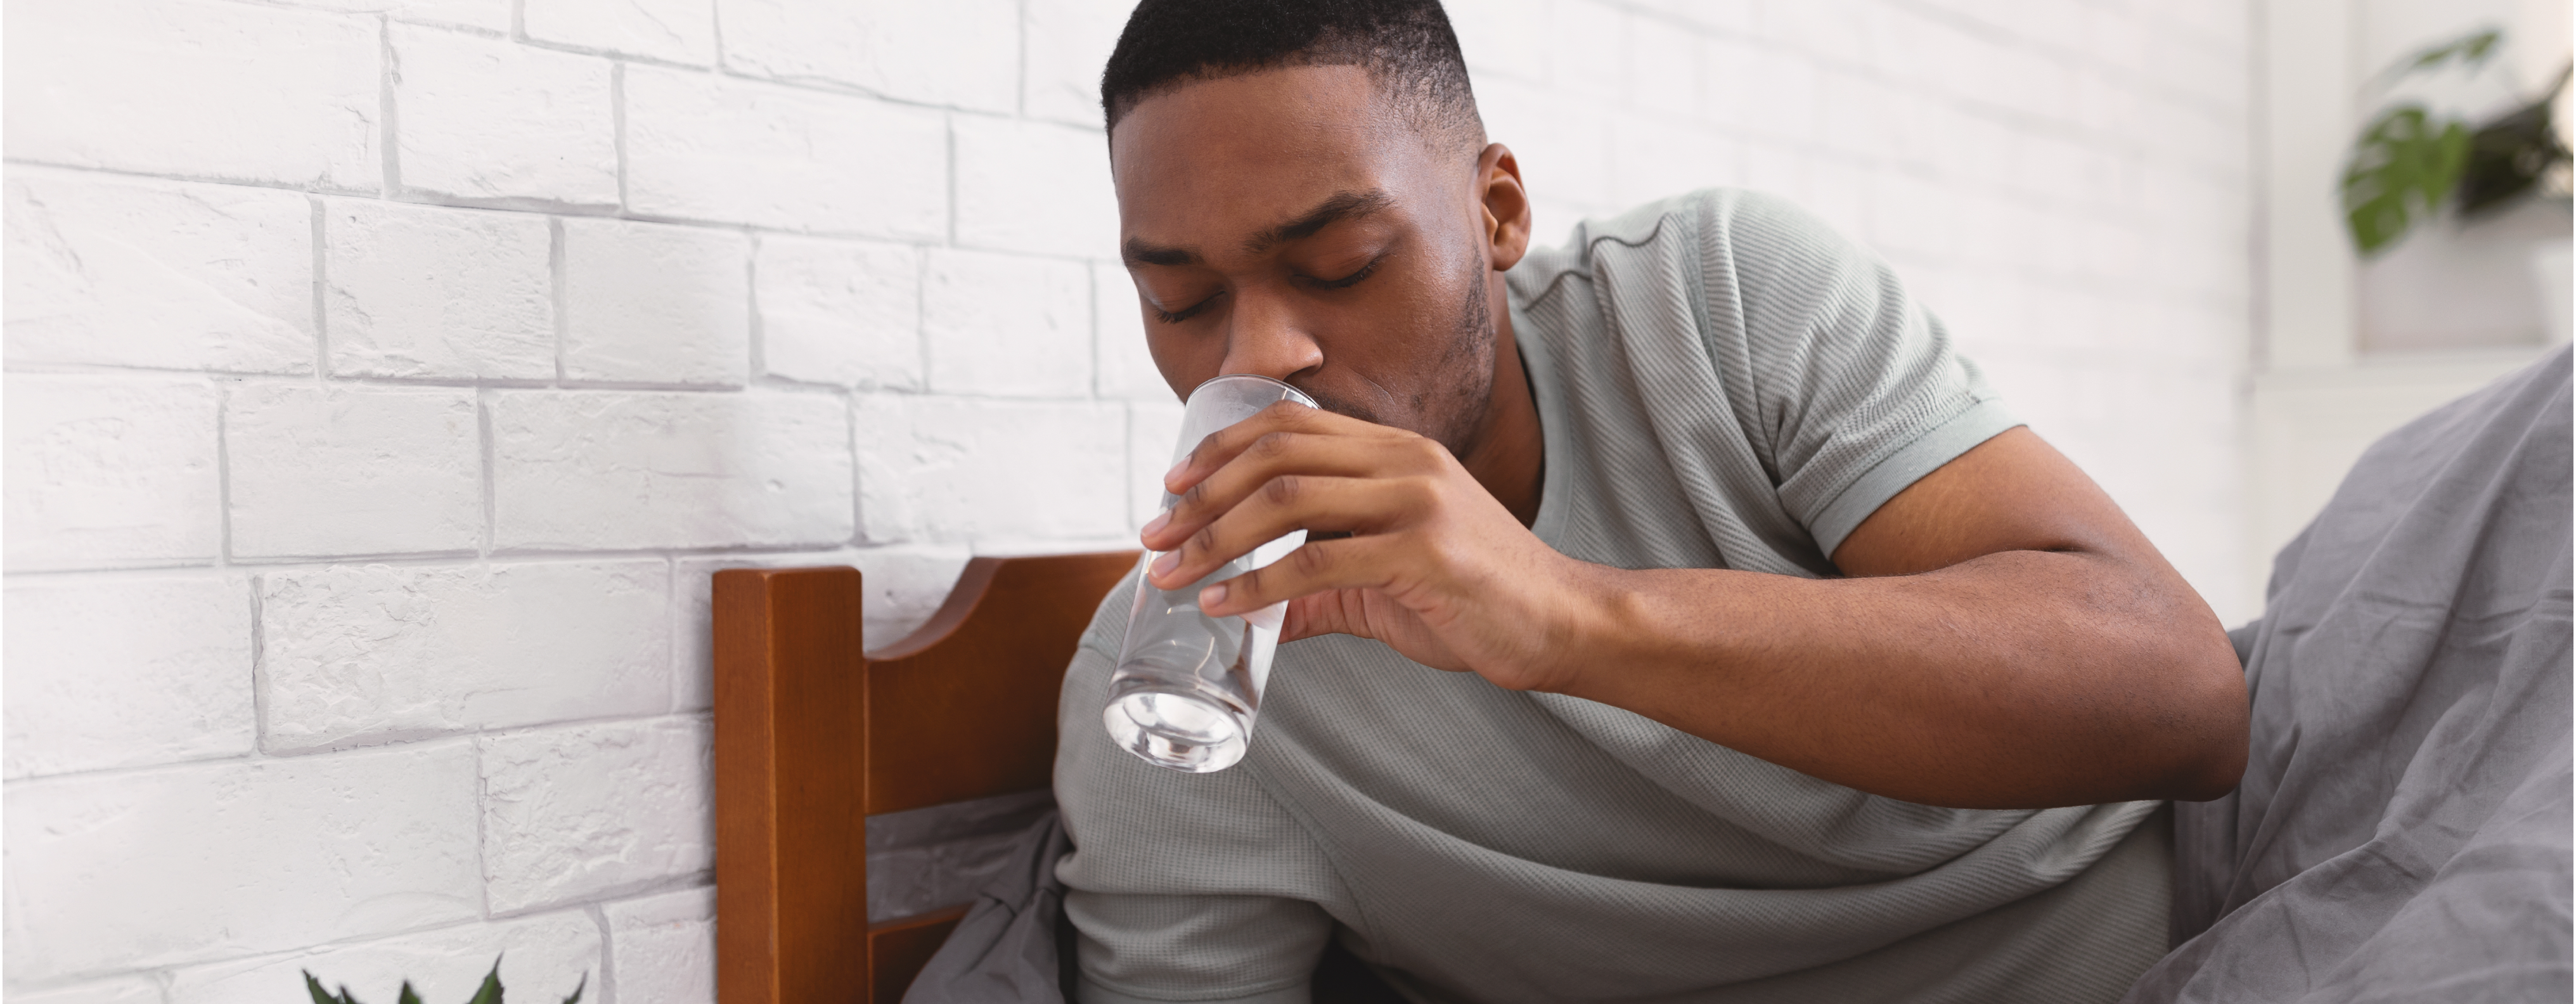 Man Drinking Water in the Morning to Stay Hydrated